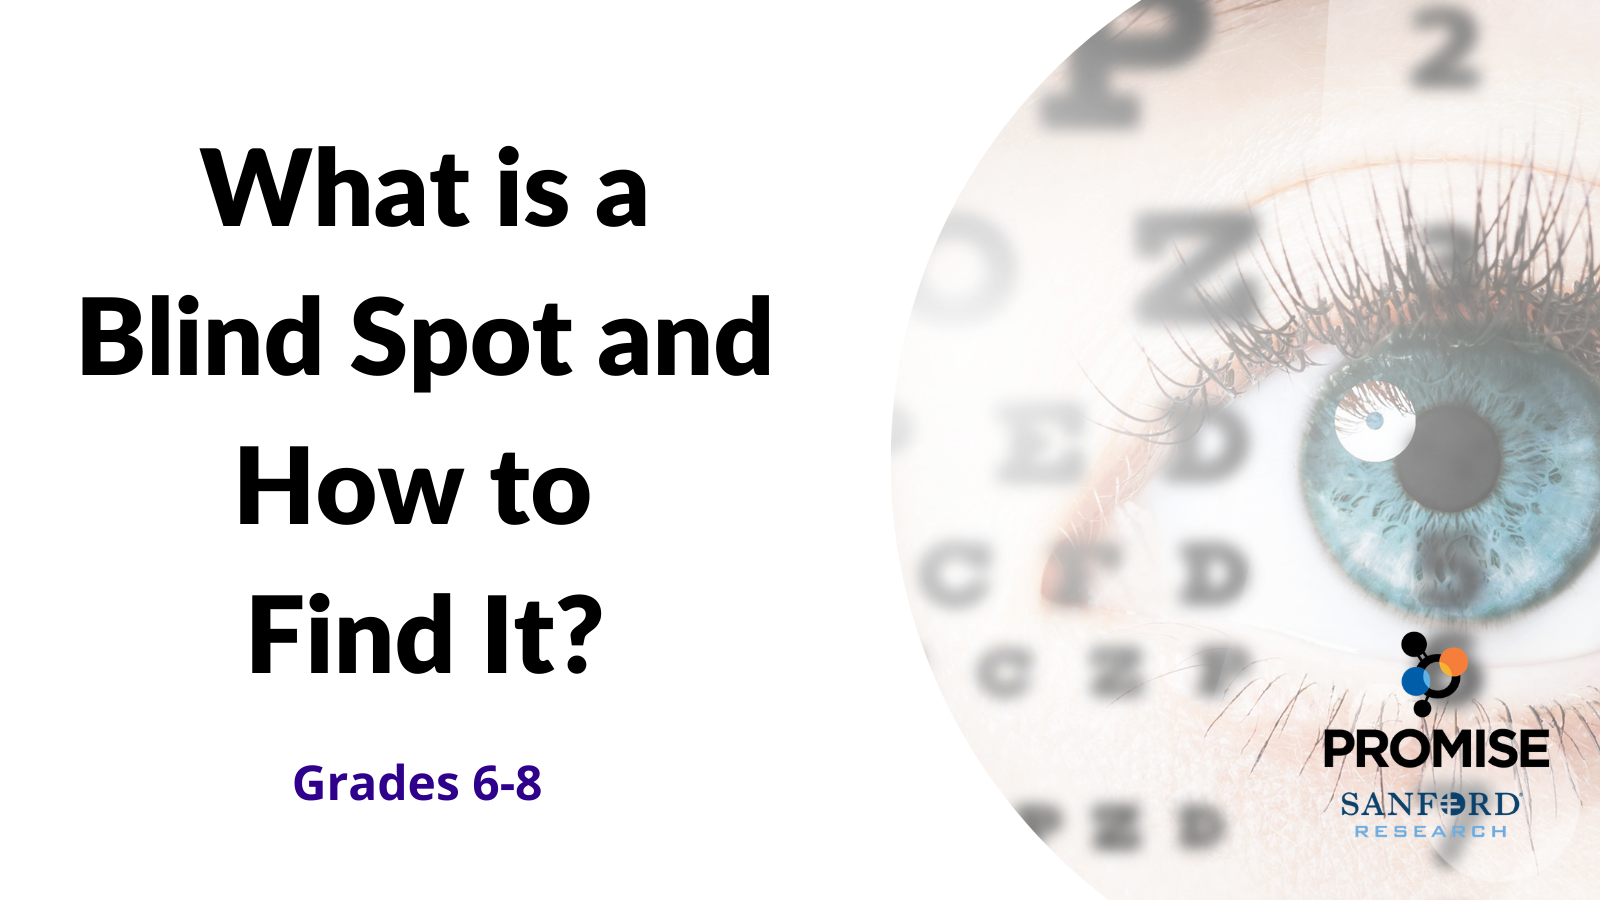 What is a Blind Spot and How to Find It? (Lesson Plan), Sanford PROMISE